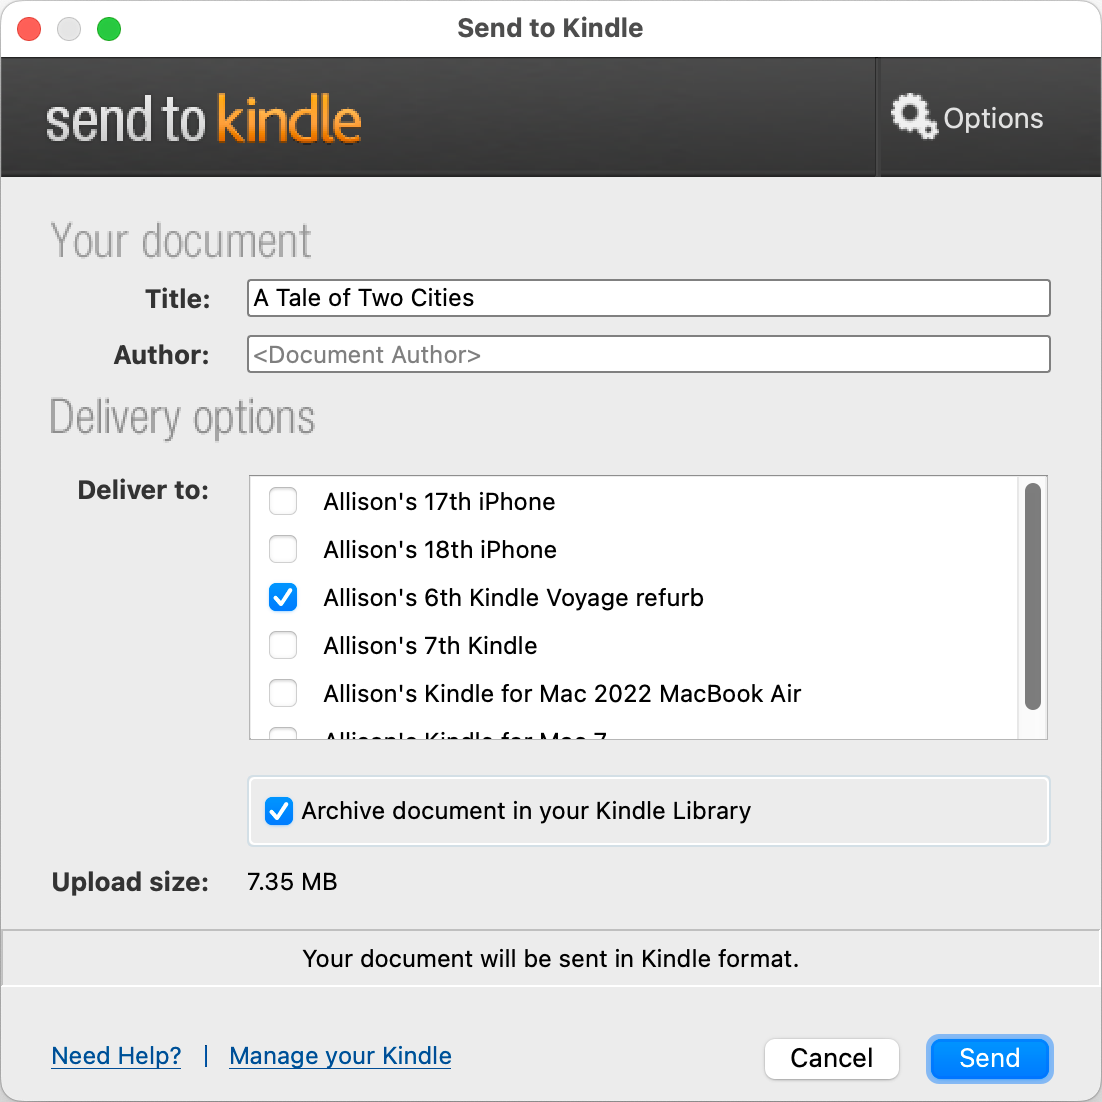 Send to Kindle App showing my devices and the book to be sent.